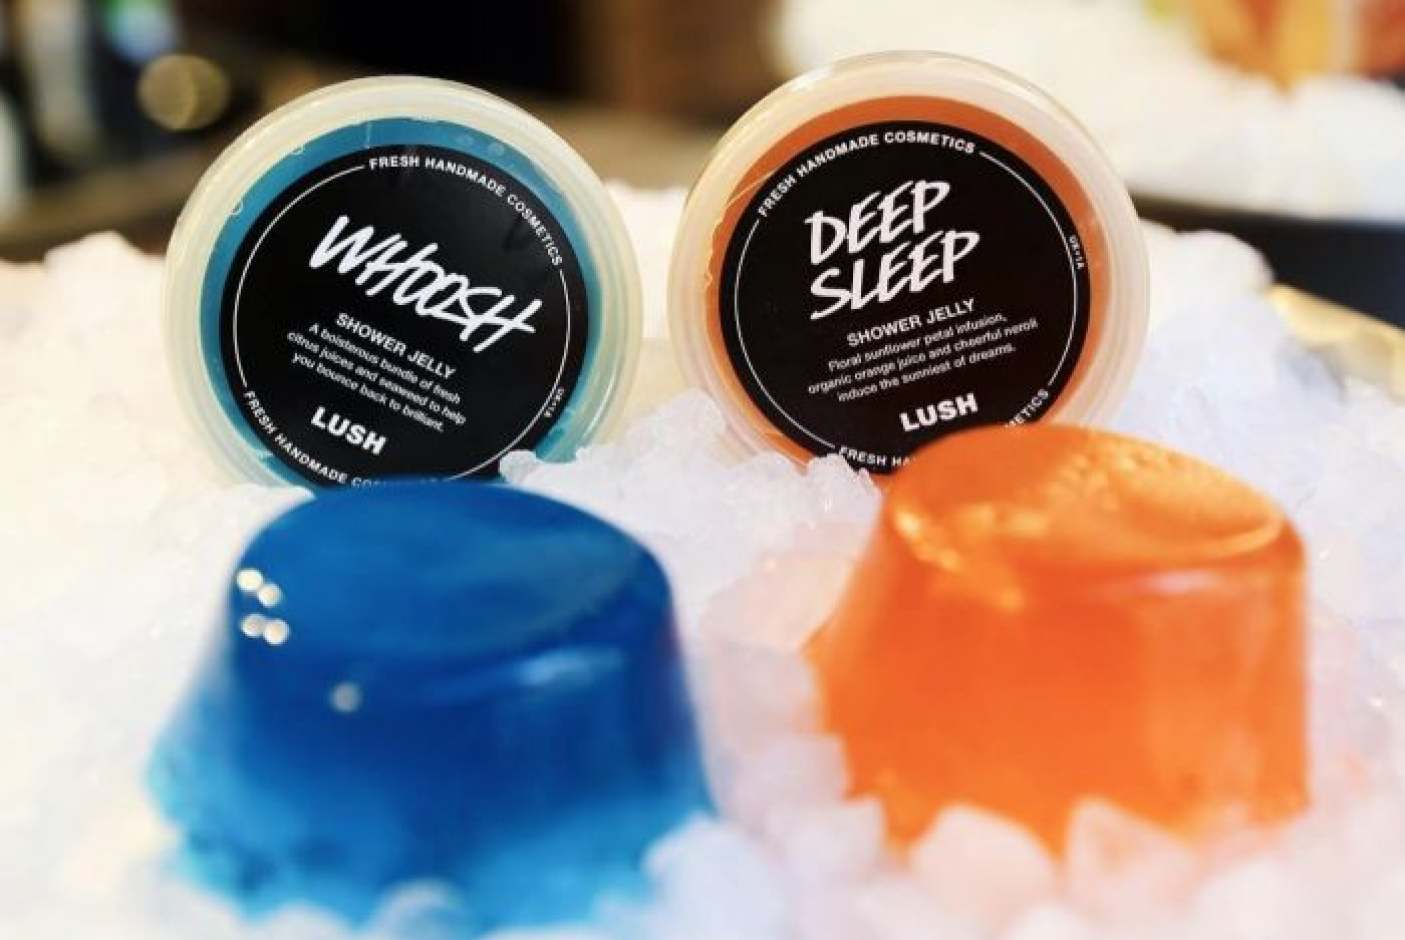 How ethical is Lush Cosmetics Ltd? | Ethical Consumer